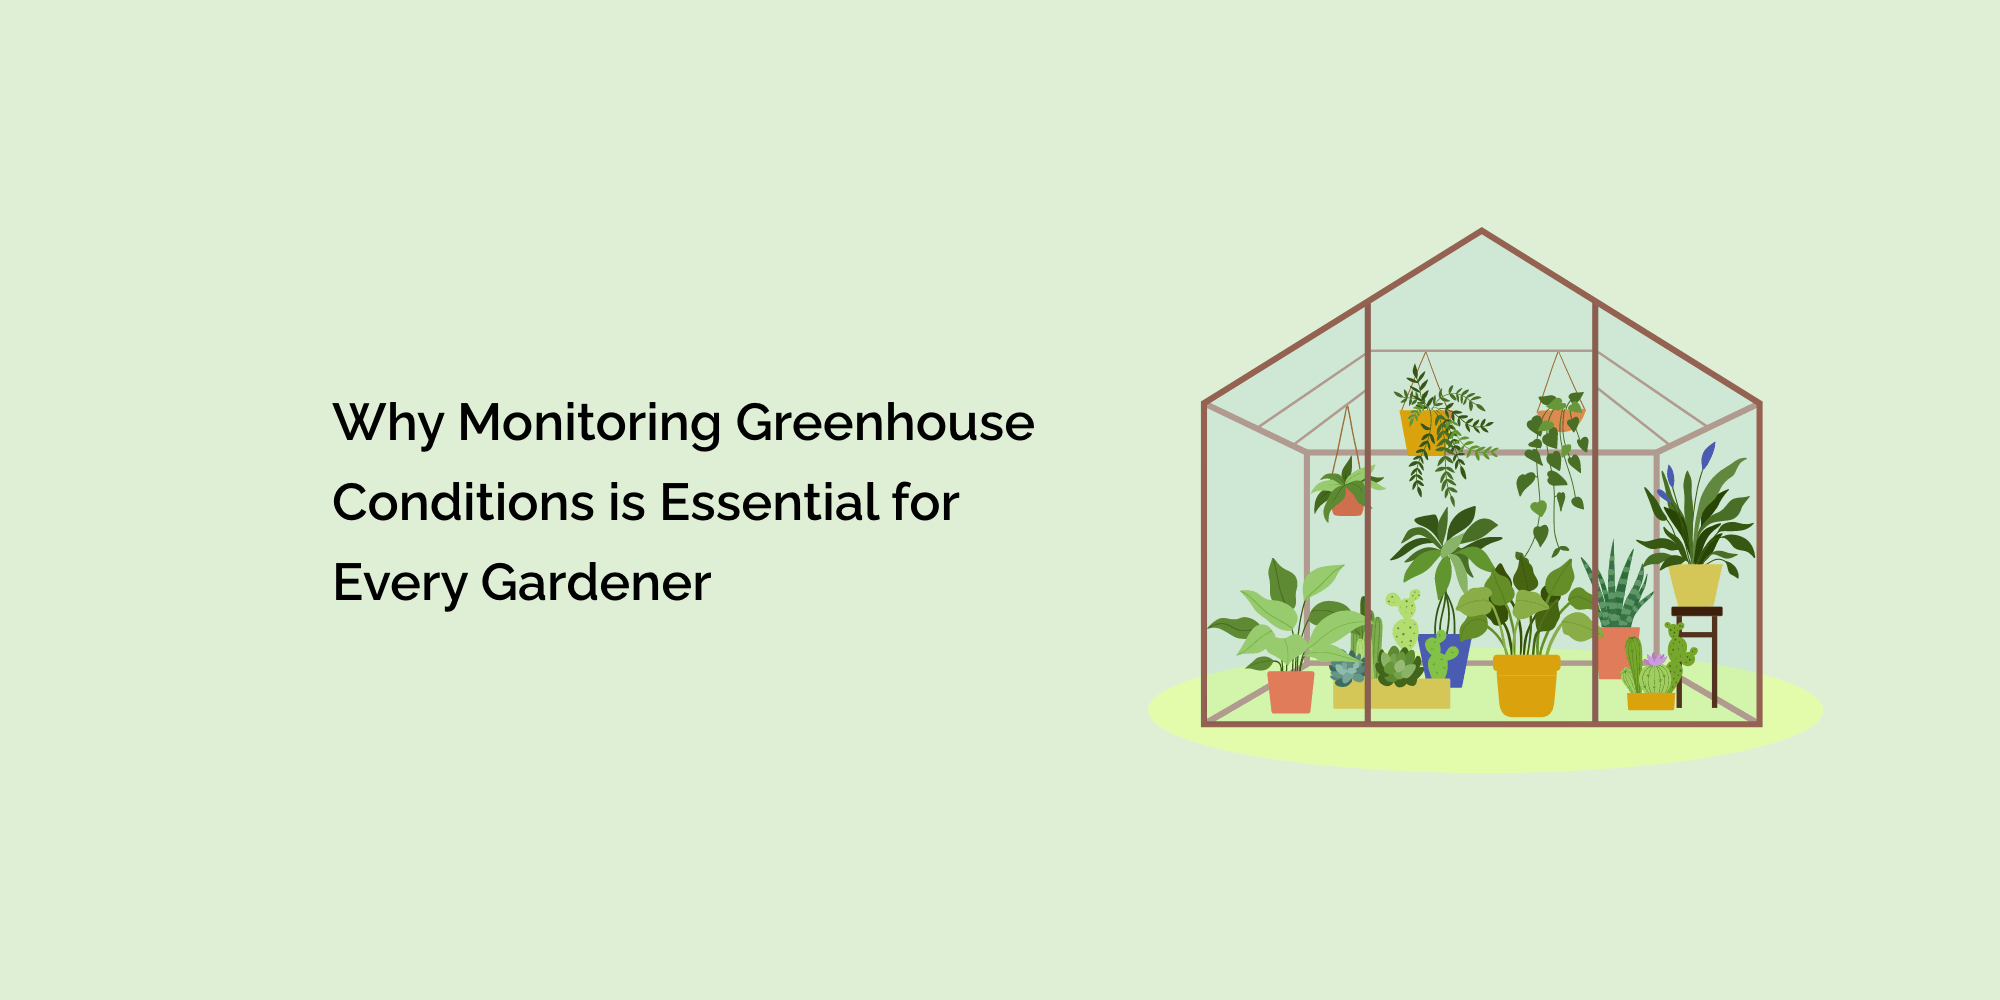 Why Monitoring Greenhouse Conditions is Essential for Every Gardener